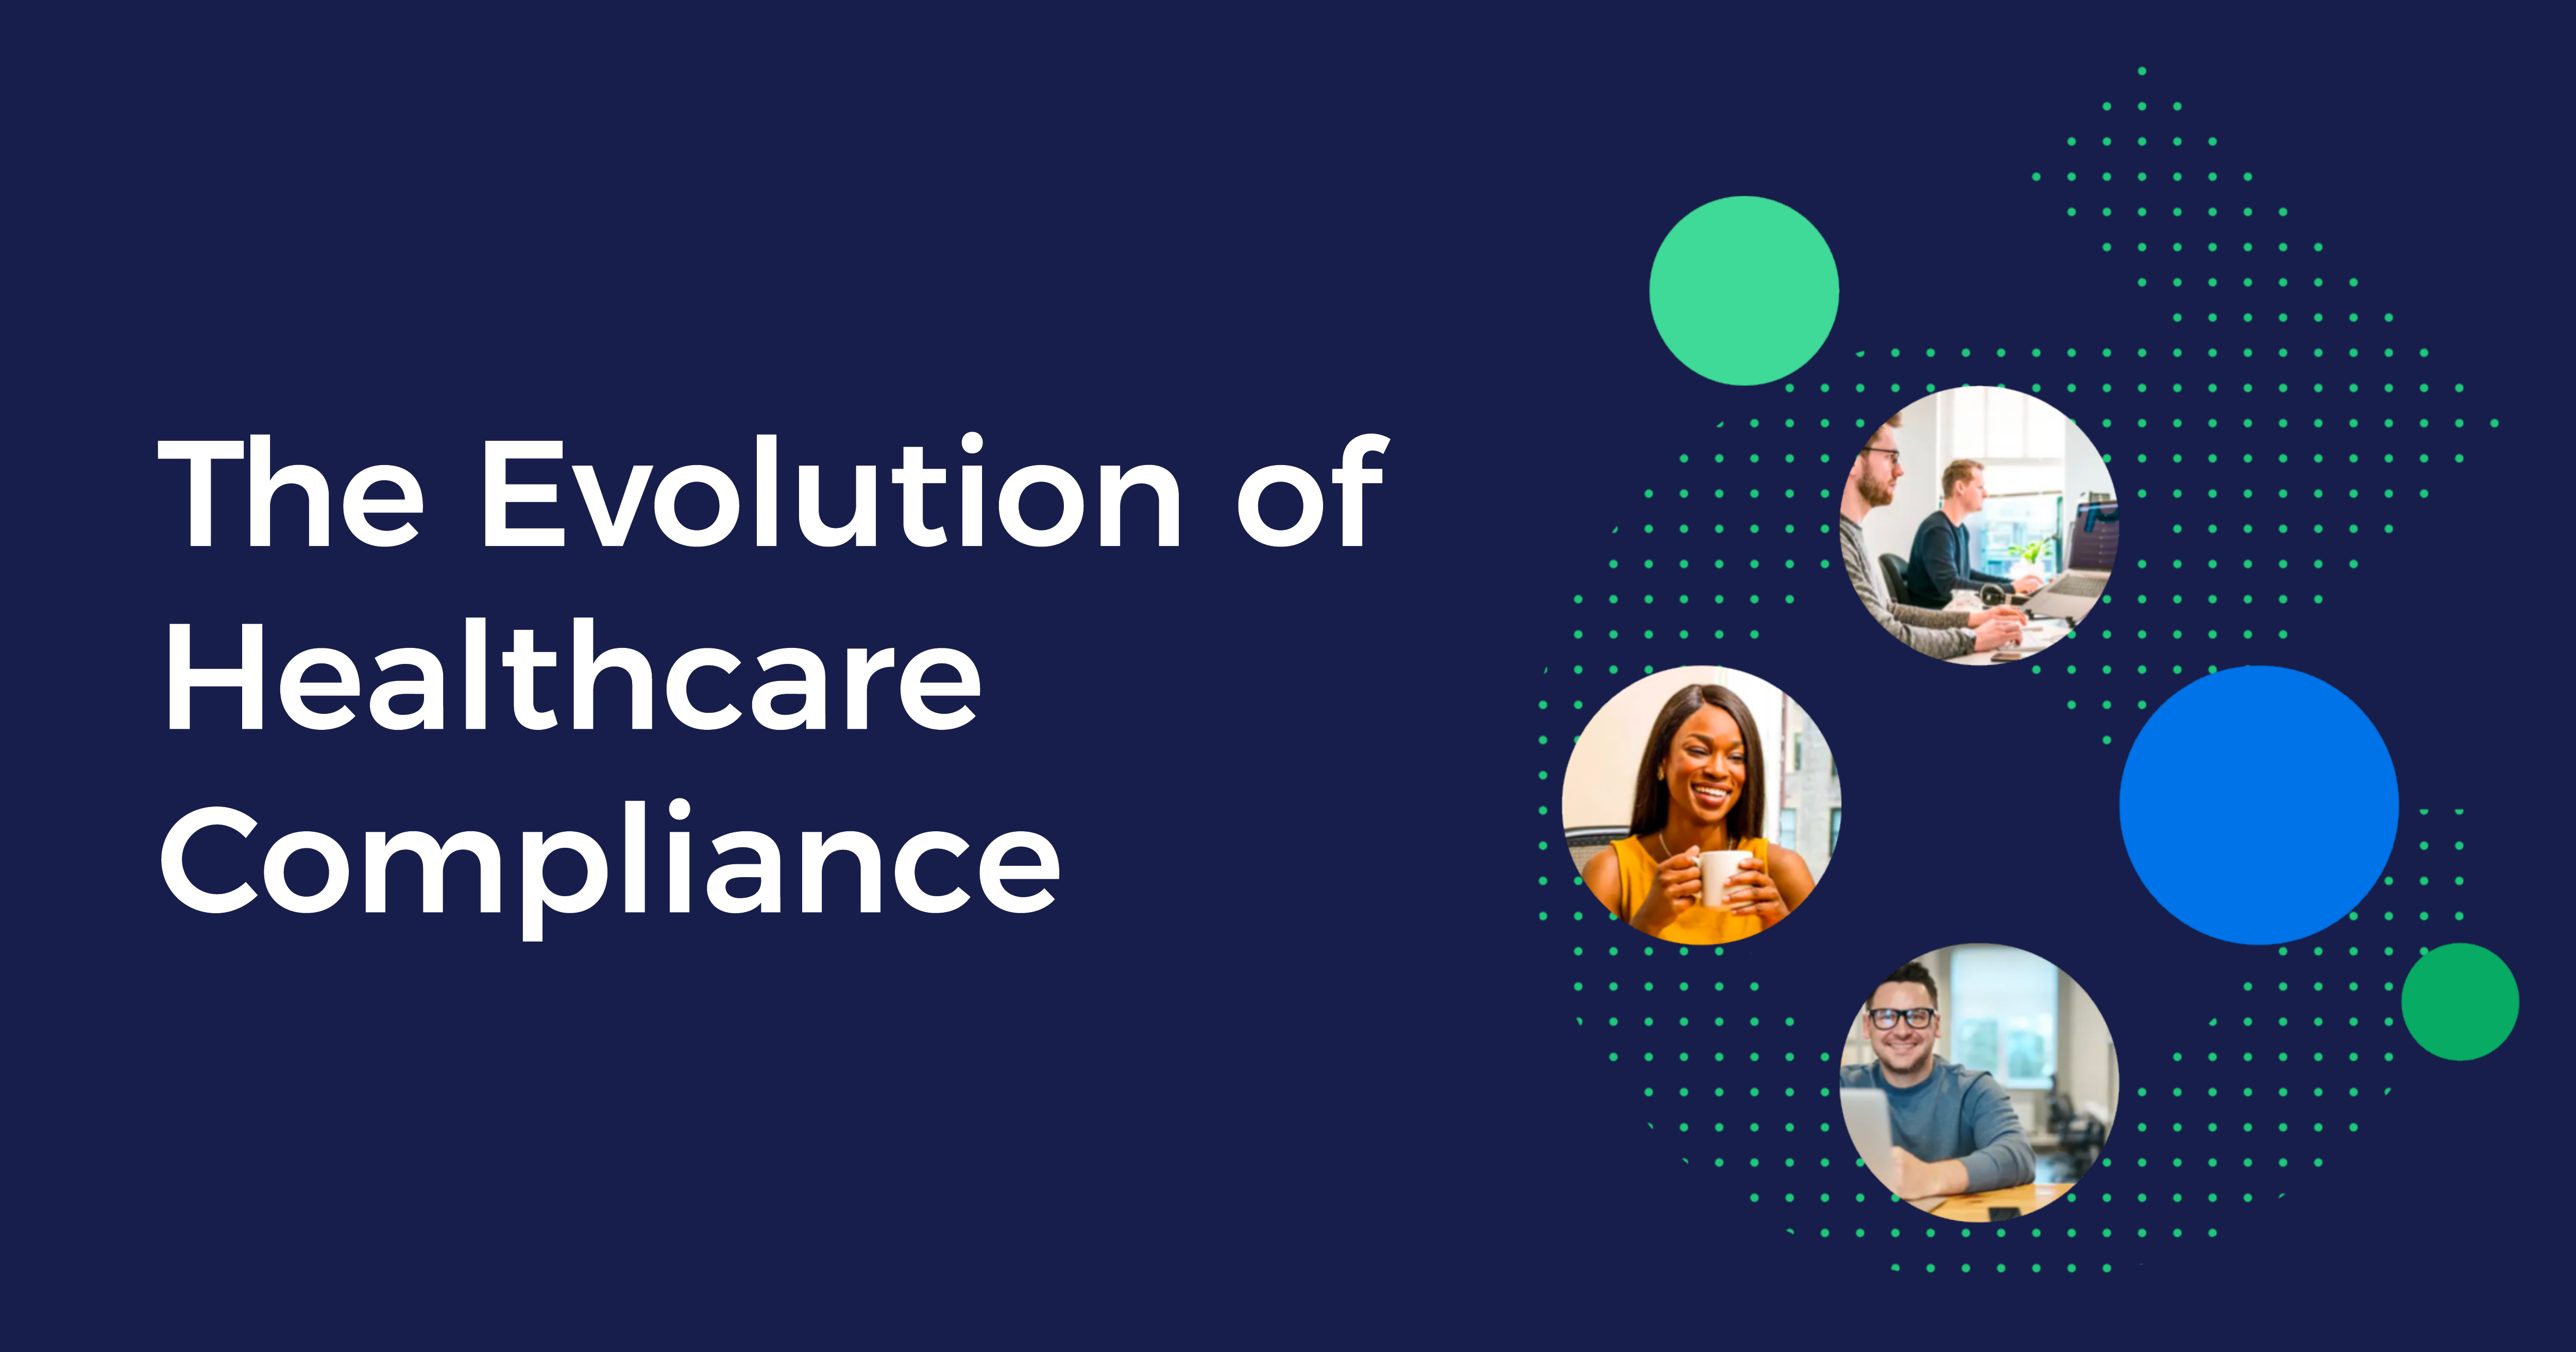 The Evolution of Healthcare Compliance